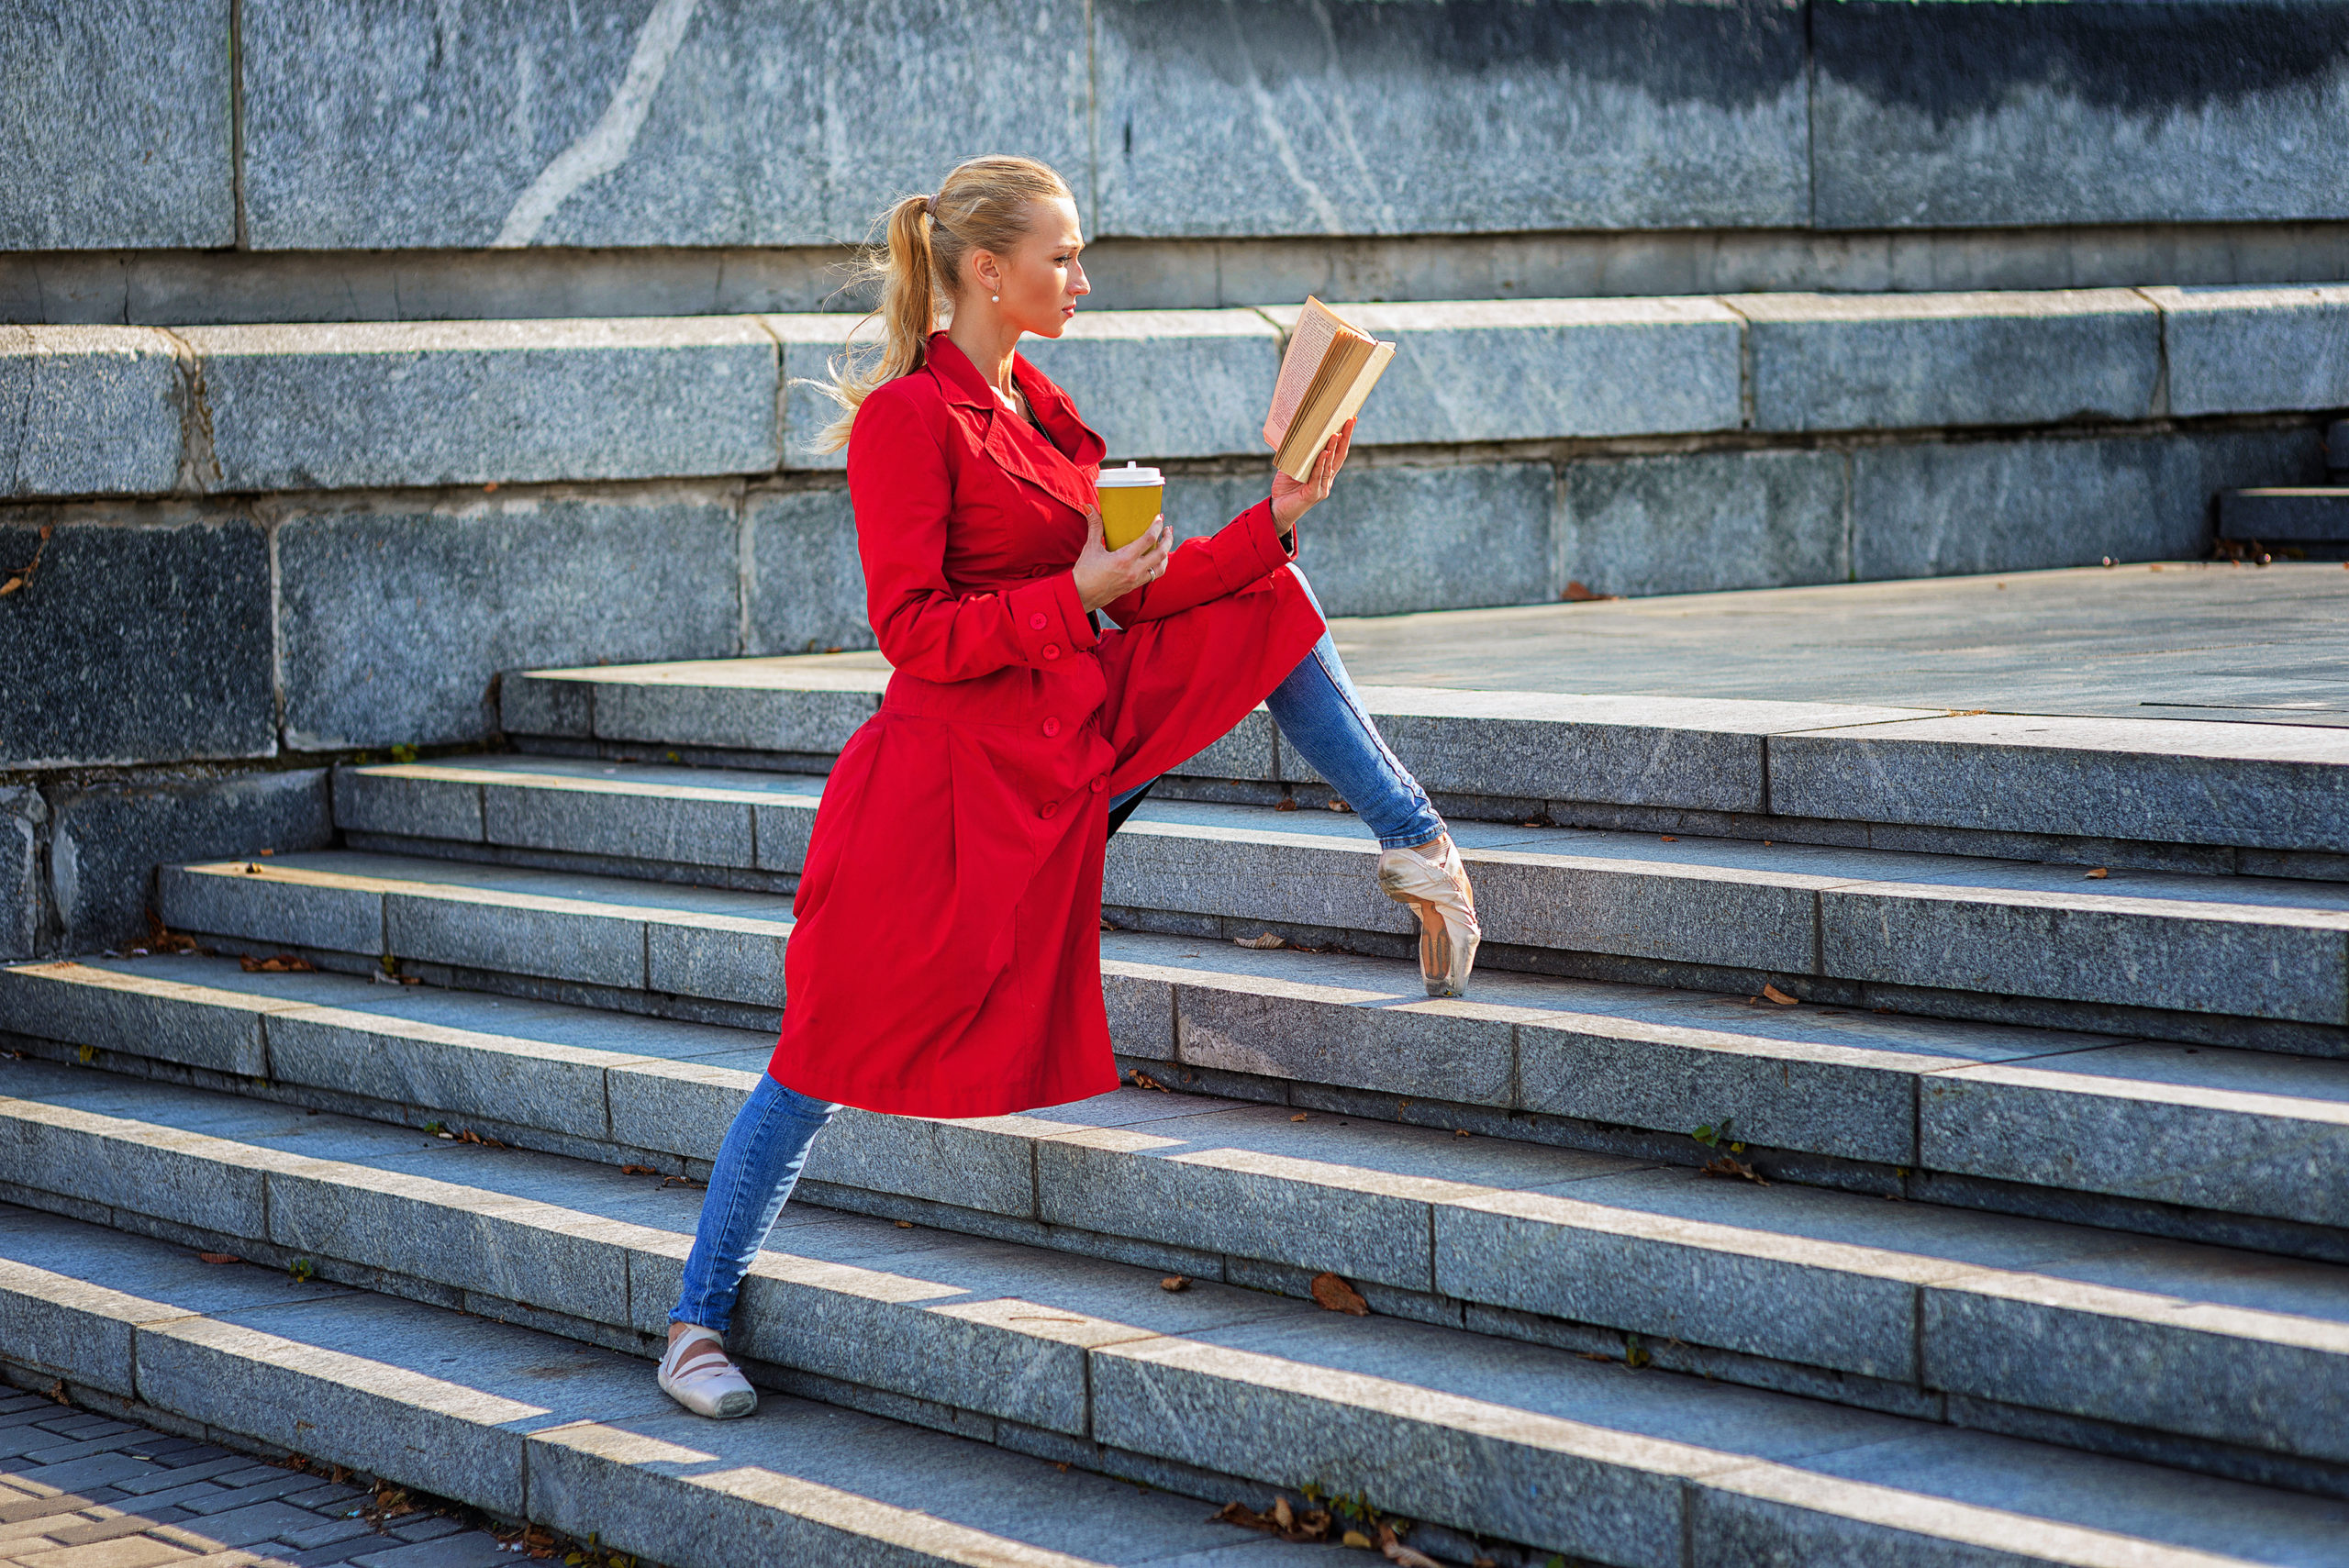 A ballerina in a red trench coat, blue jeans and pointe shoes poses on an outdoor staircase, propping her left leg on pointe three stairs above her right leg. She holds a cup of coffee in her right hand and a book, which she is reading, in her left.